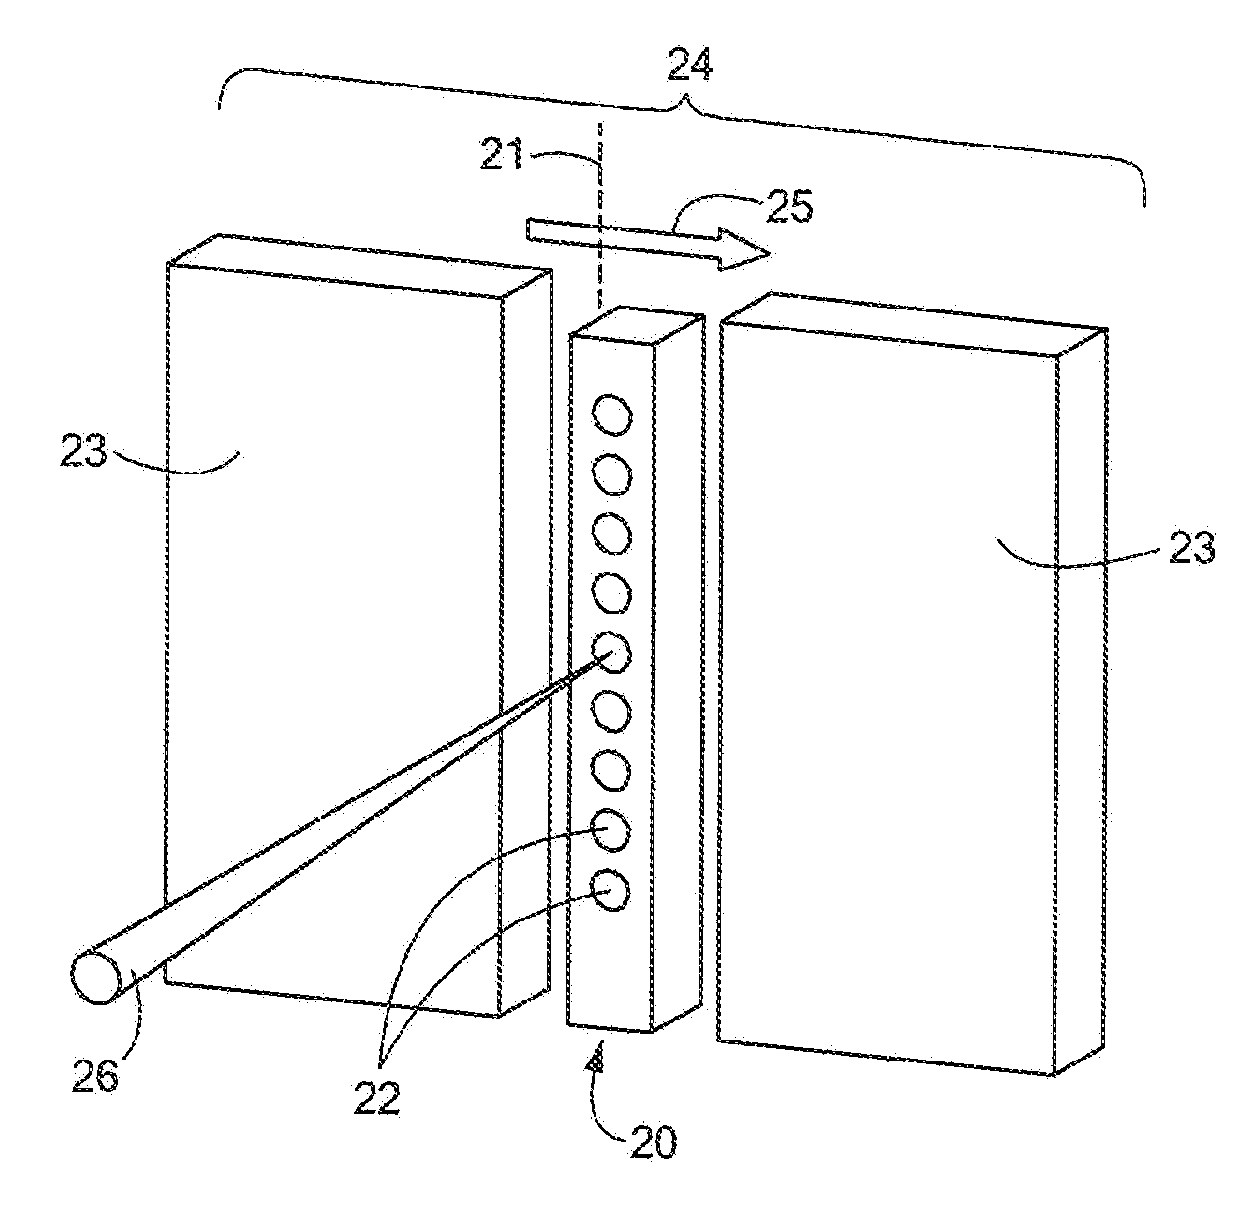 X-ray Imaging of Baggage and Personnel Using Arrays of Discrete Sources and Multiple Collimated Beams